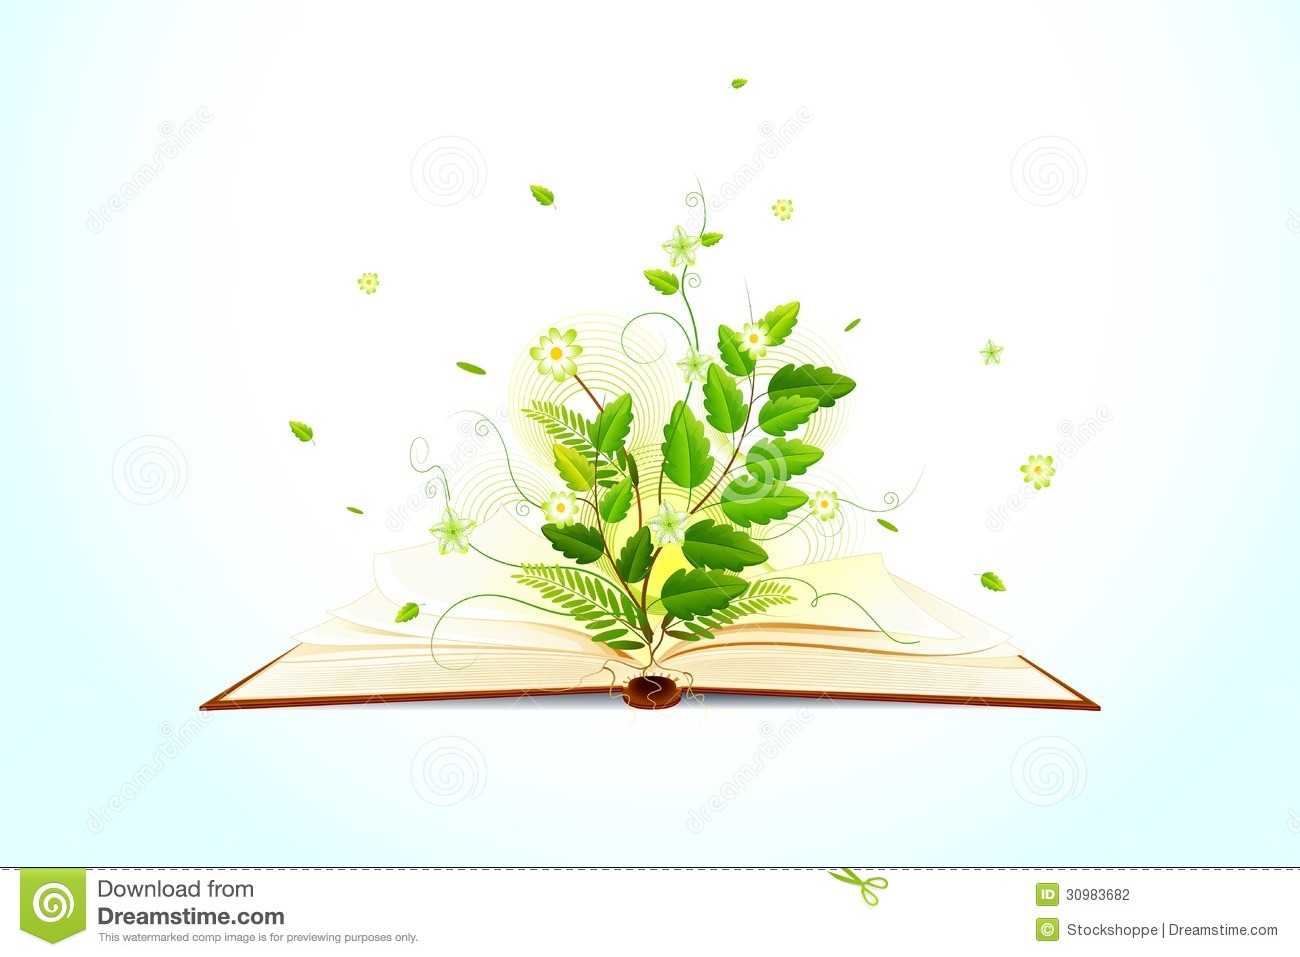 Plants Growing Out of Books